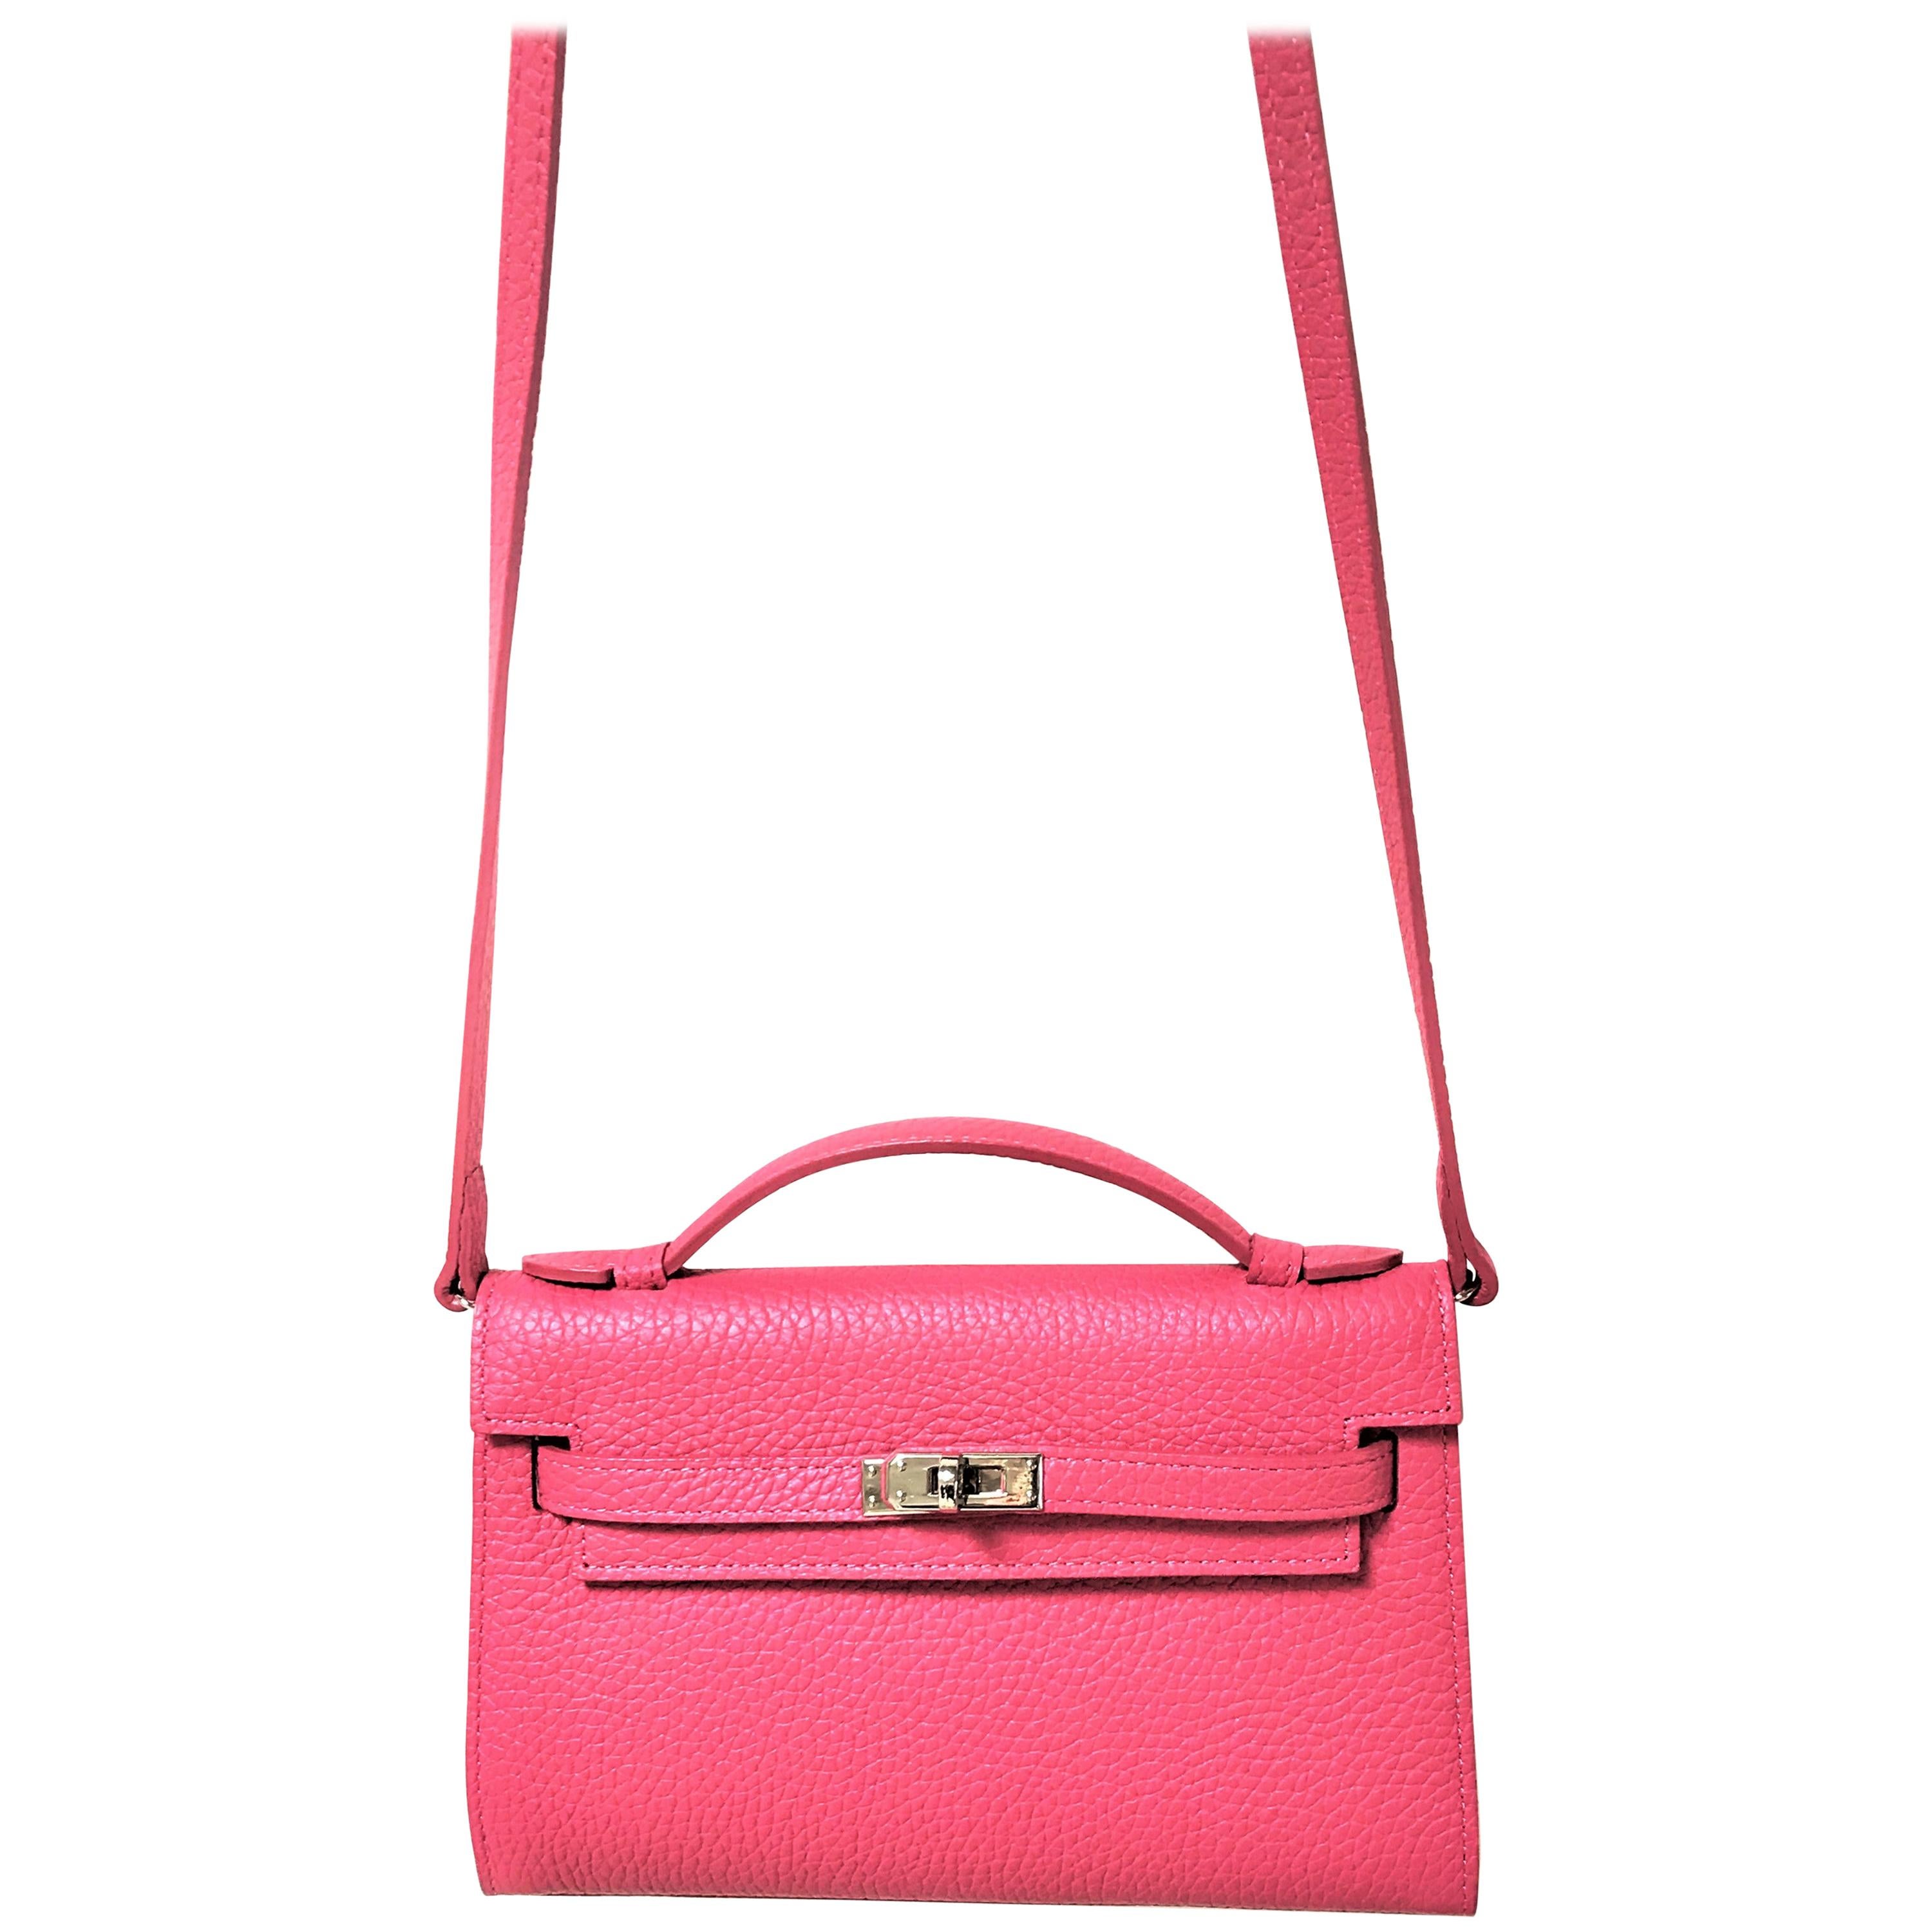 a new Pochette pink leather with shoulder strap 